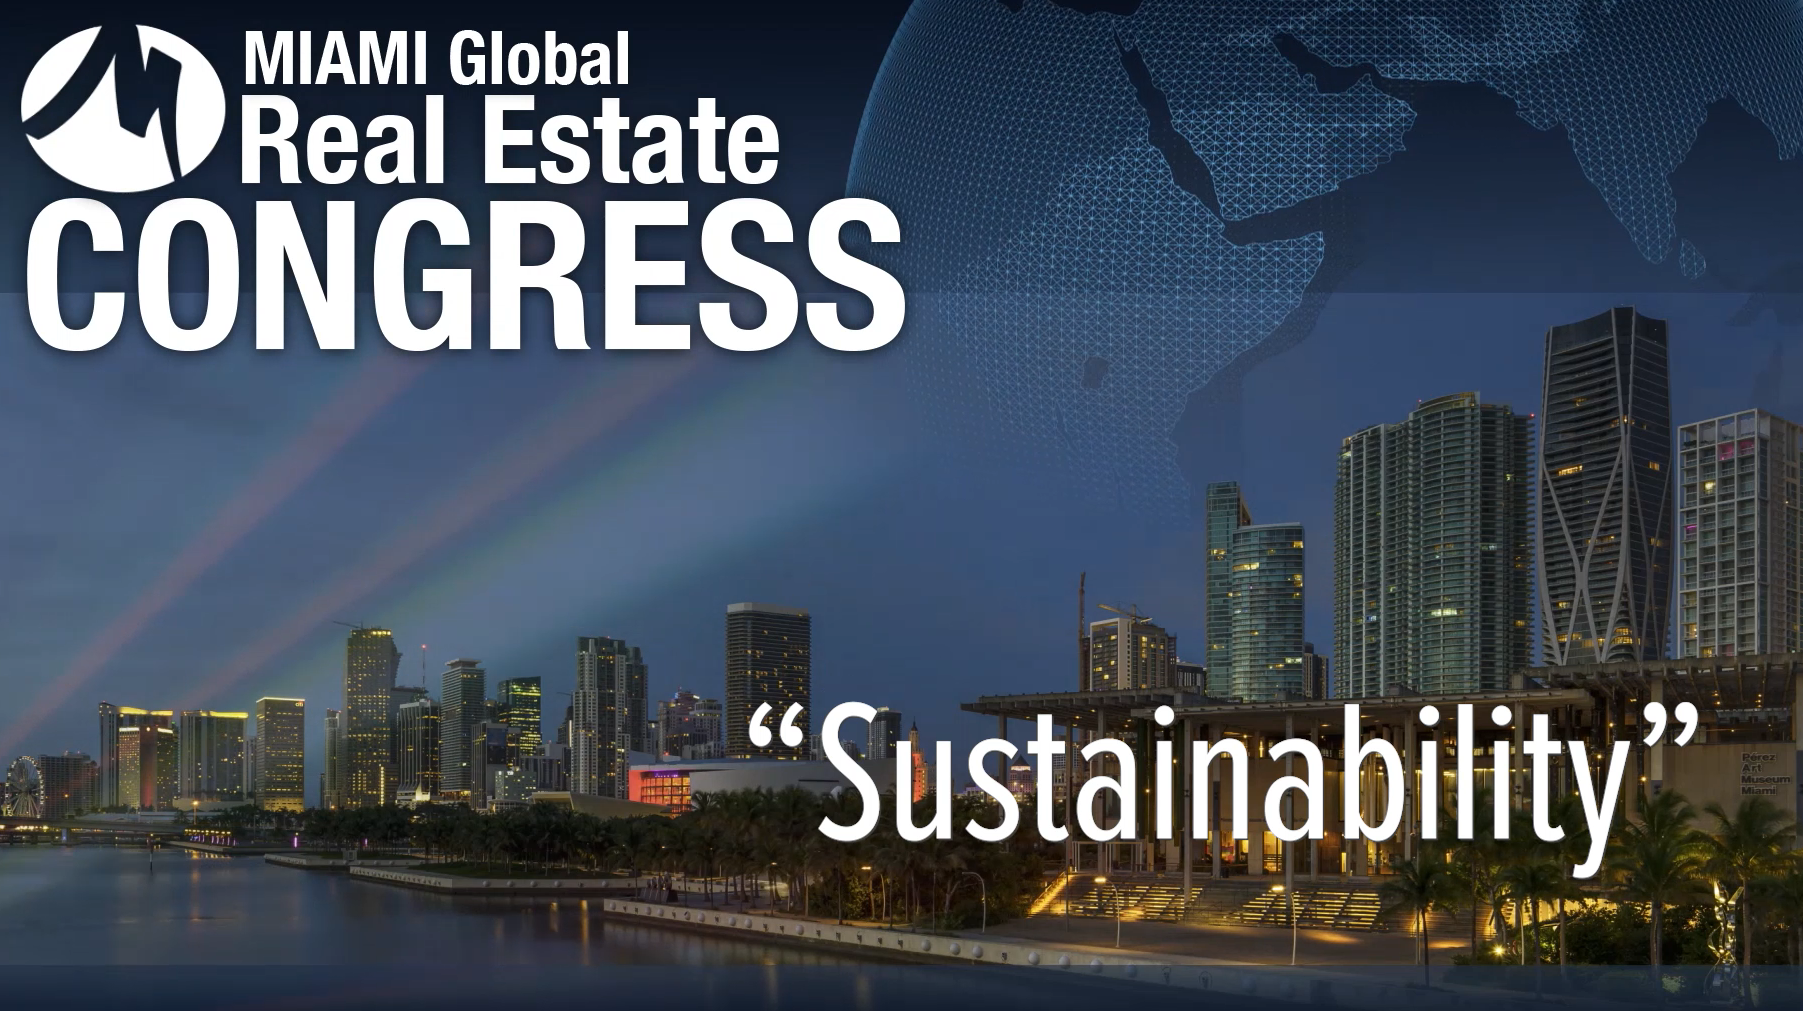 MIAMI Global Real Estate Congress 2022 Sustainability Panel